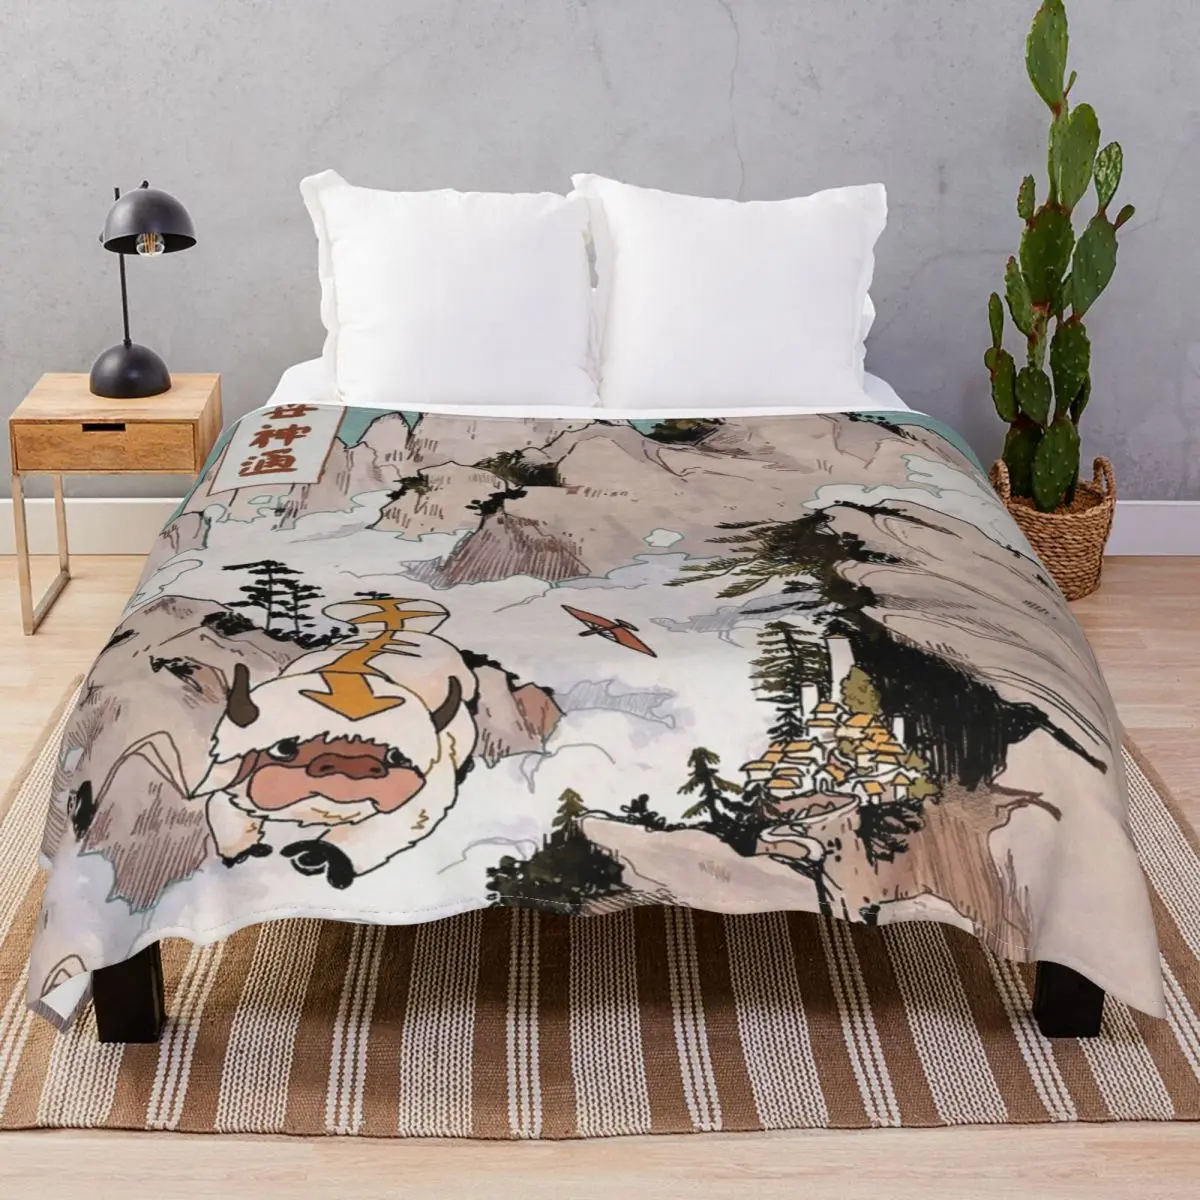 Avatar The Last Airbender Appa Blankets Fleece Winter Warm Unisex Throw Blanket for Bed Home Couch Travel Cinema